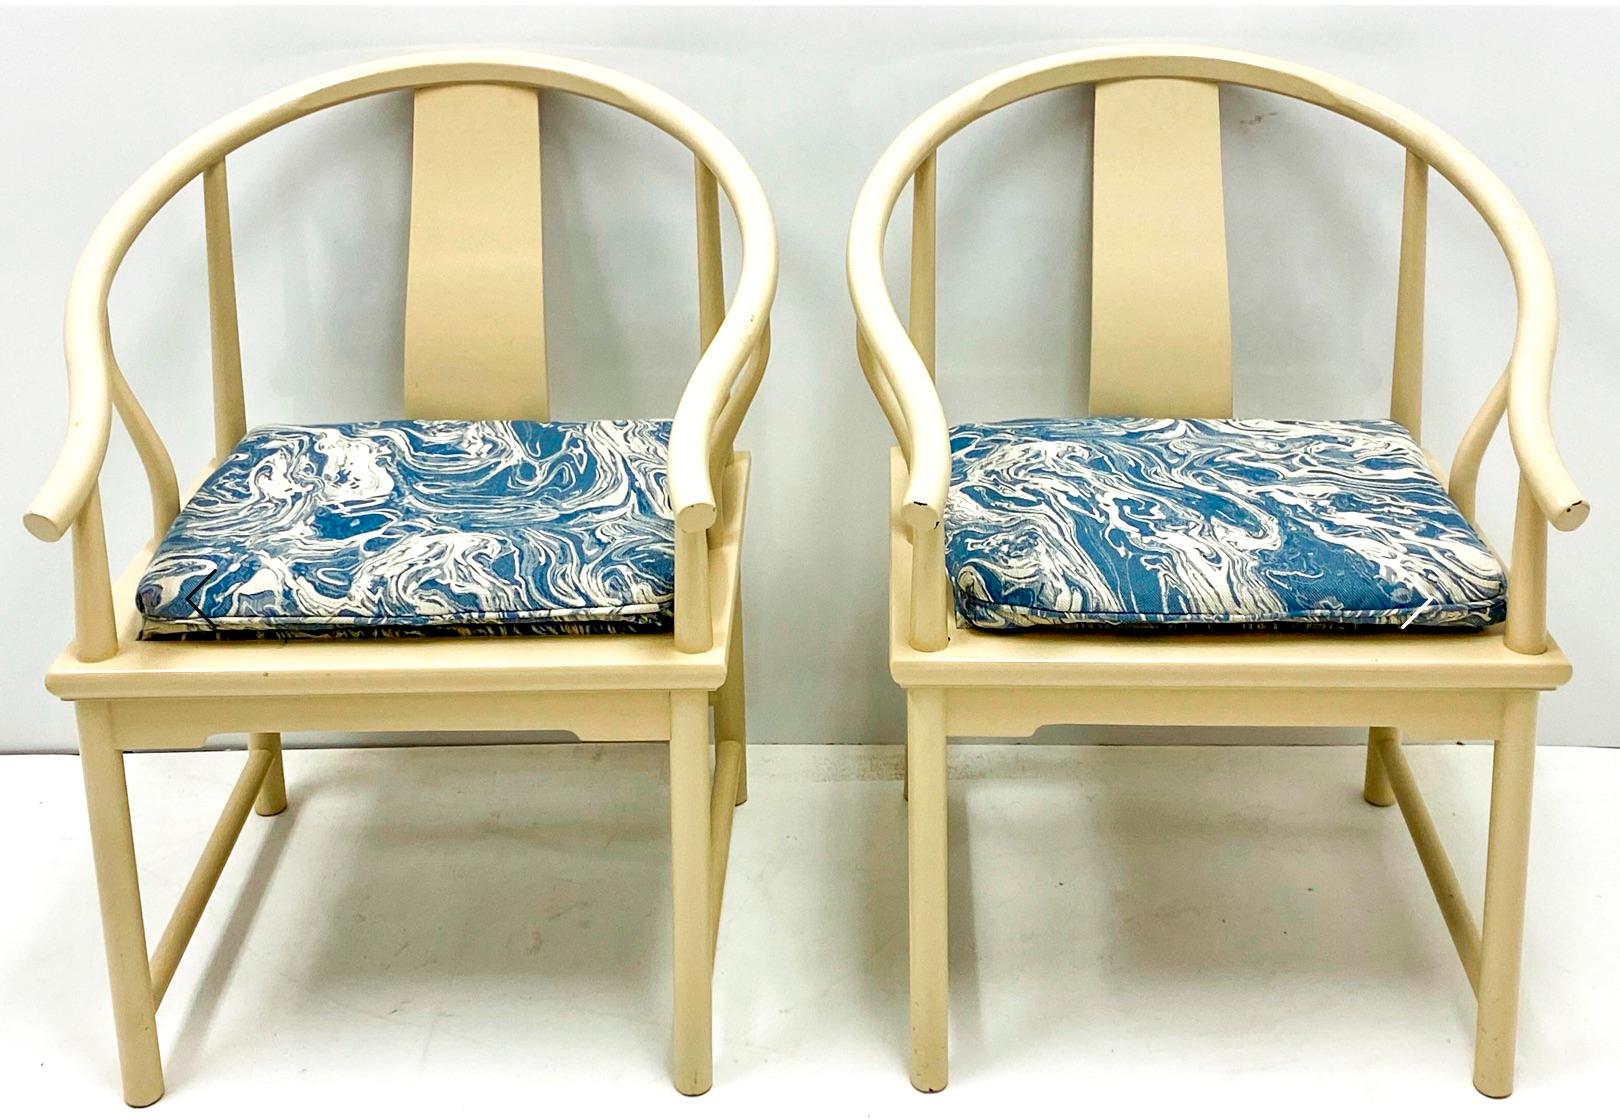 This is a vintage pair of Ming style arm chairs by Baker Furniture. The ivory lacquer is vintage, and the blue marbleized upholstery is new. They are marked and in very good condition.